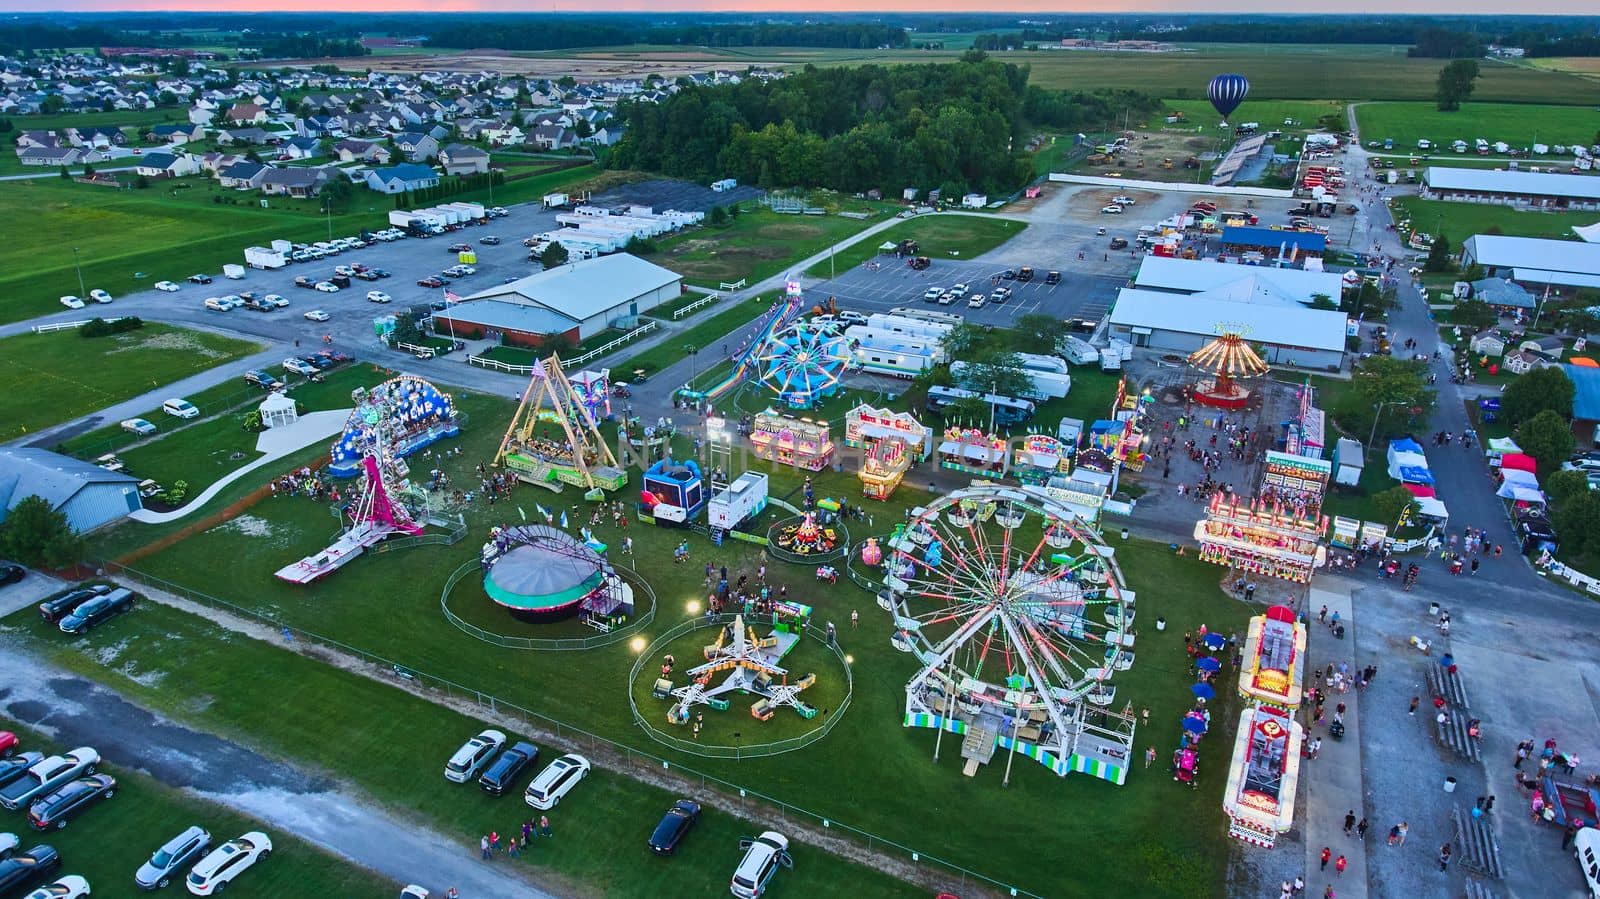 Image of Dusk aerial over Allen County Fair carnival in midwest Indiana